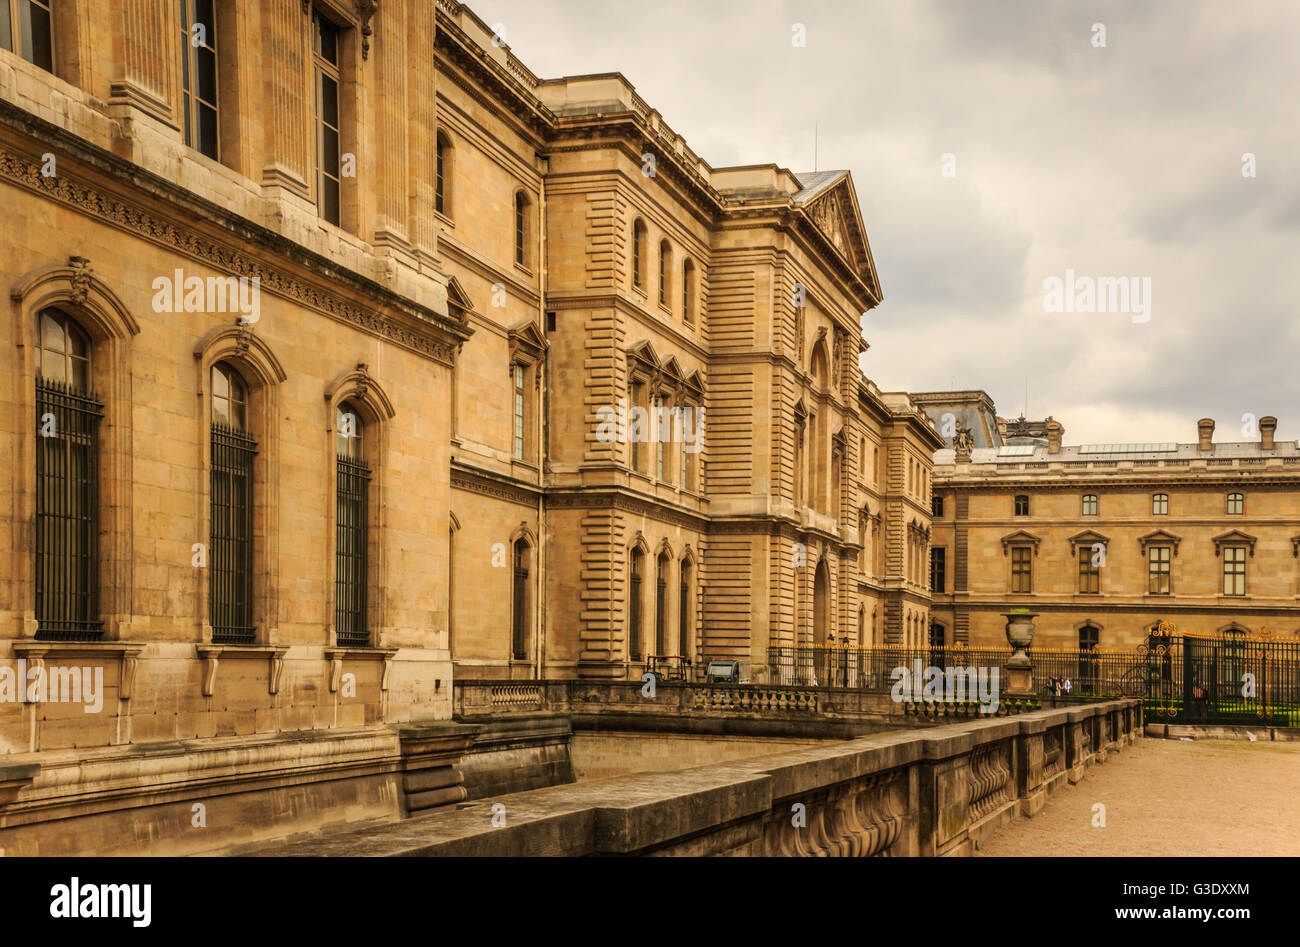 Originally built in 1190 as a fortress, The Louvre later became a palace for King Francis I and is now a famous museum. Stock Photo